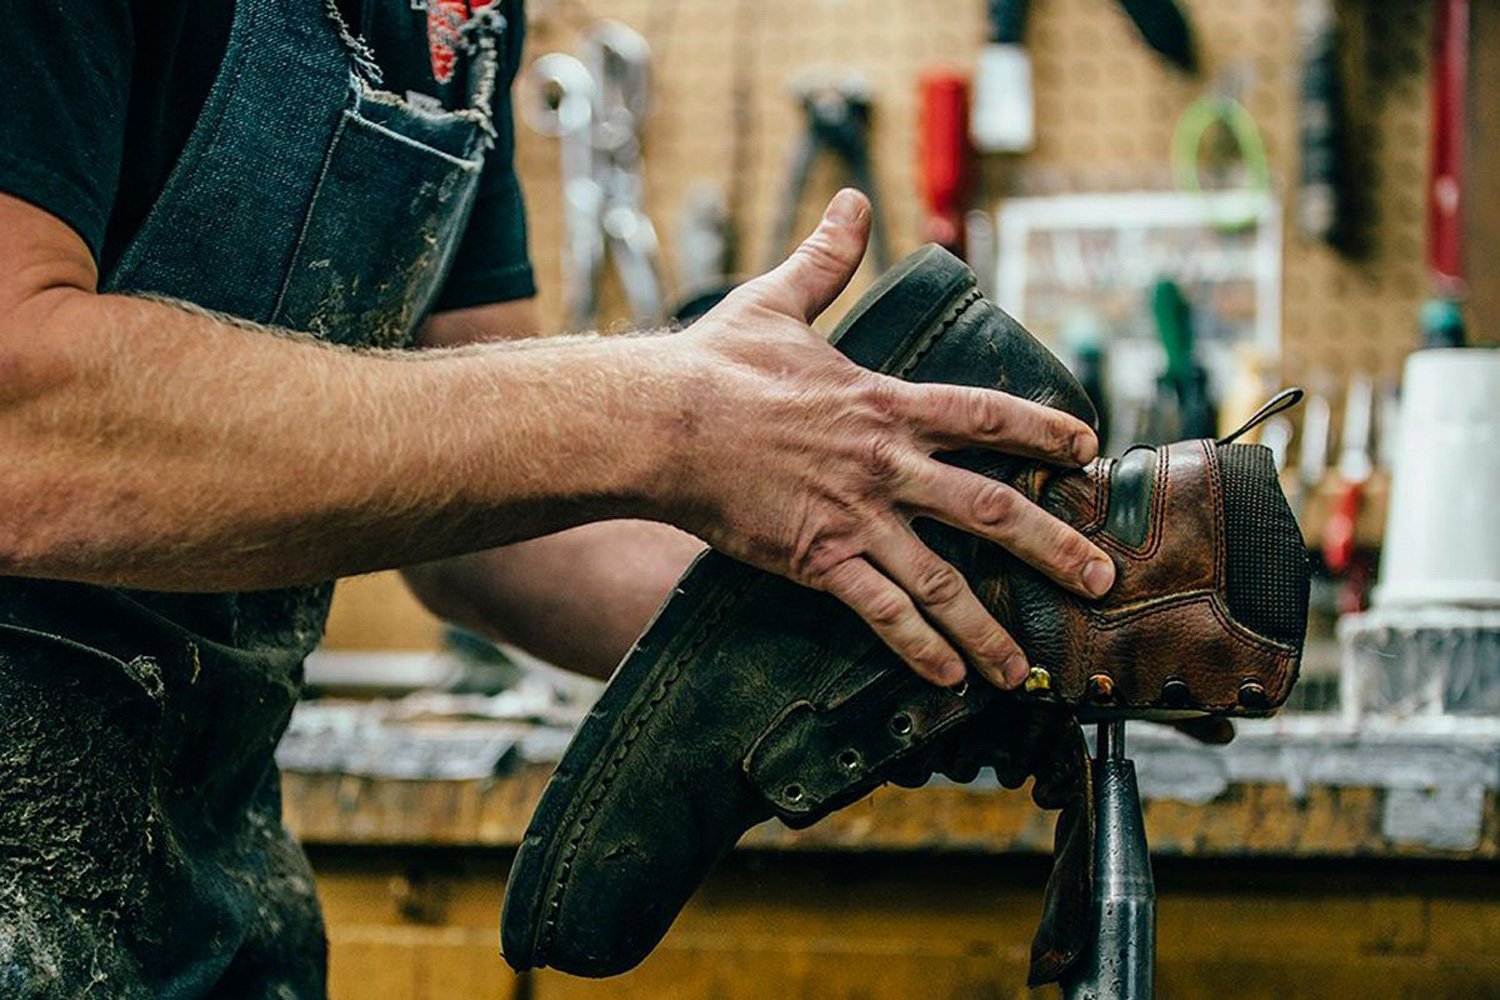 Say Goodbye To Work Boots. Indestructible Shoes Are Sneakers Built For The Construction Yard